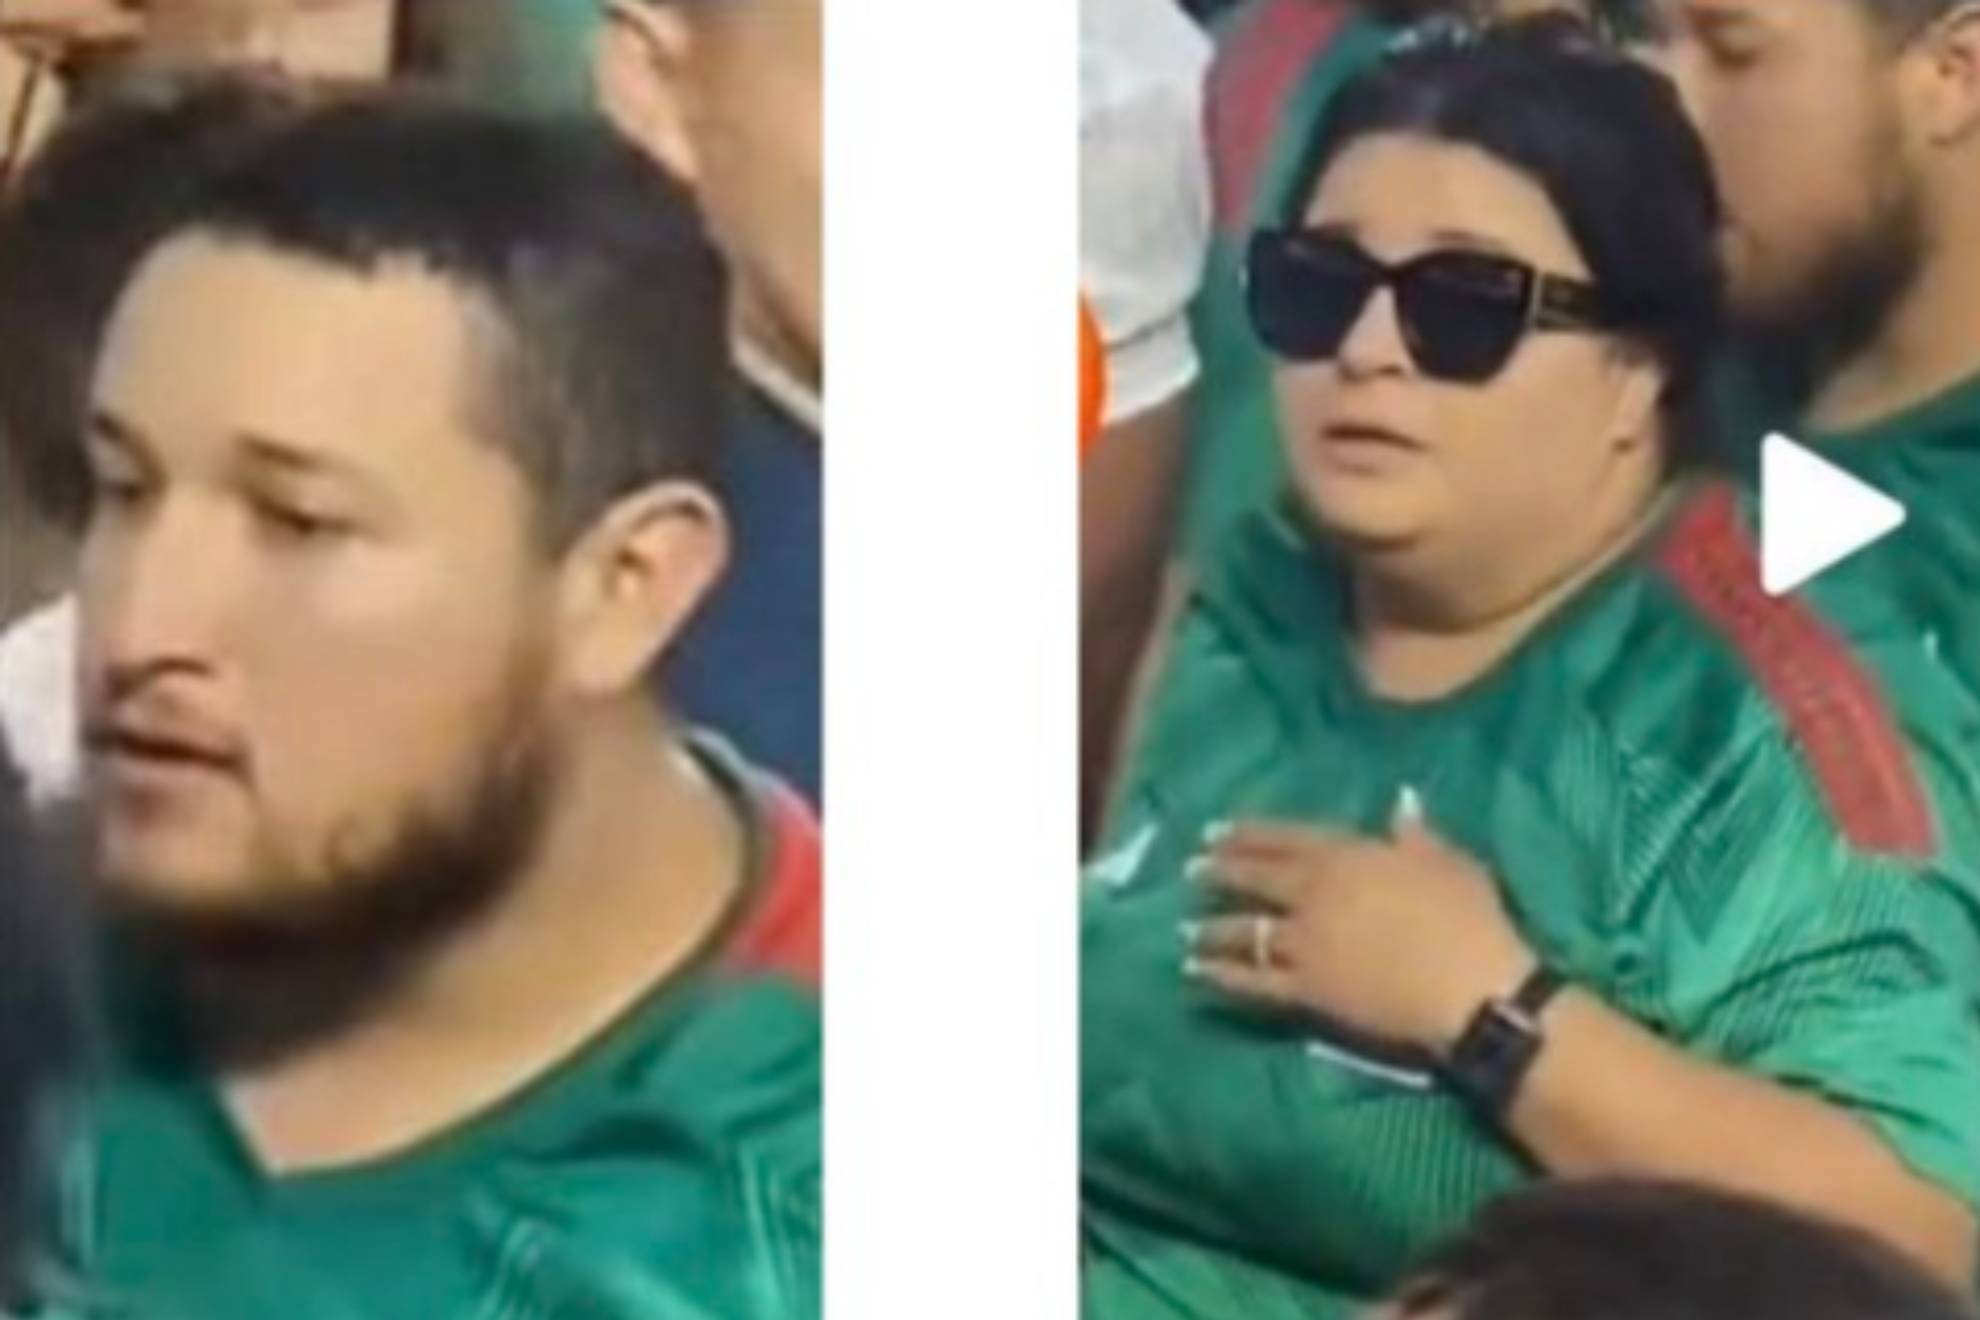 Police search for attacker and accomplice after stabbing at Mexico game: Images released to help find them